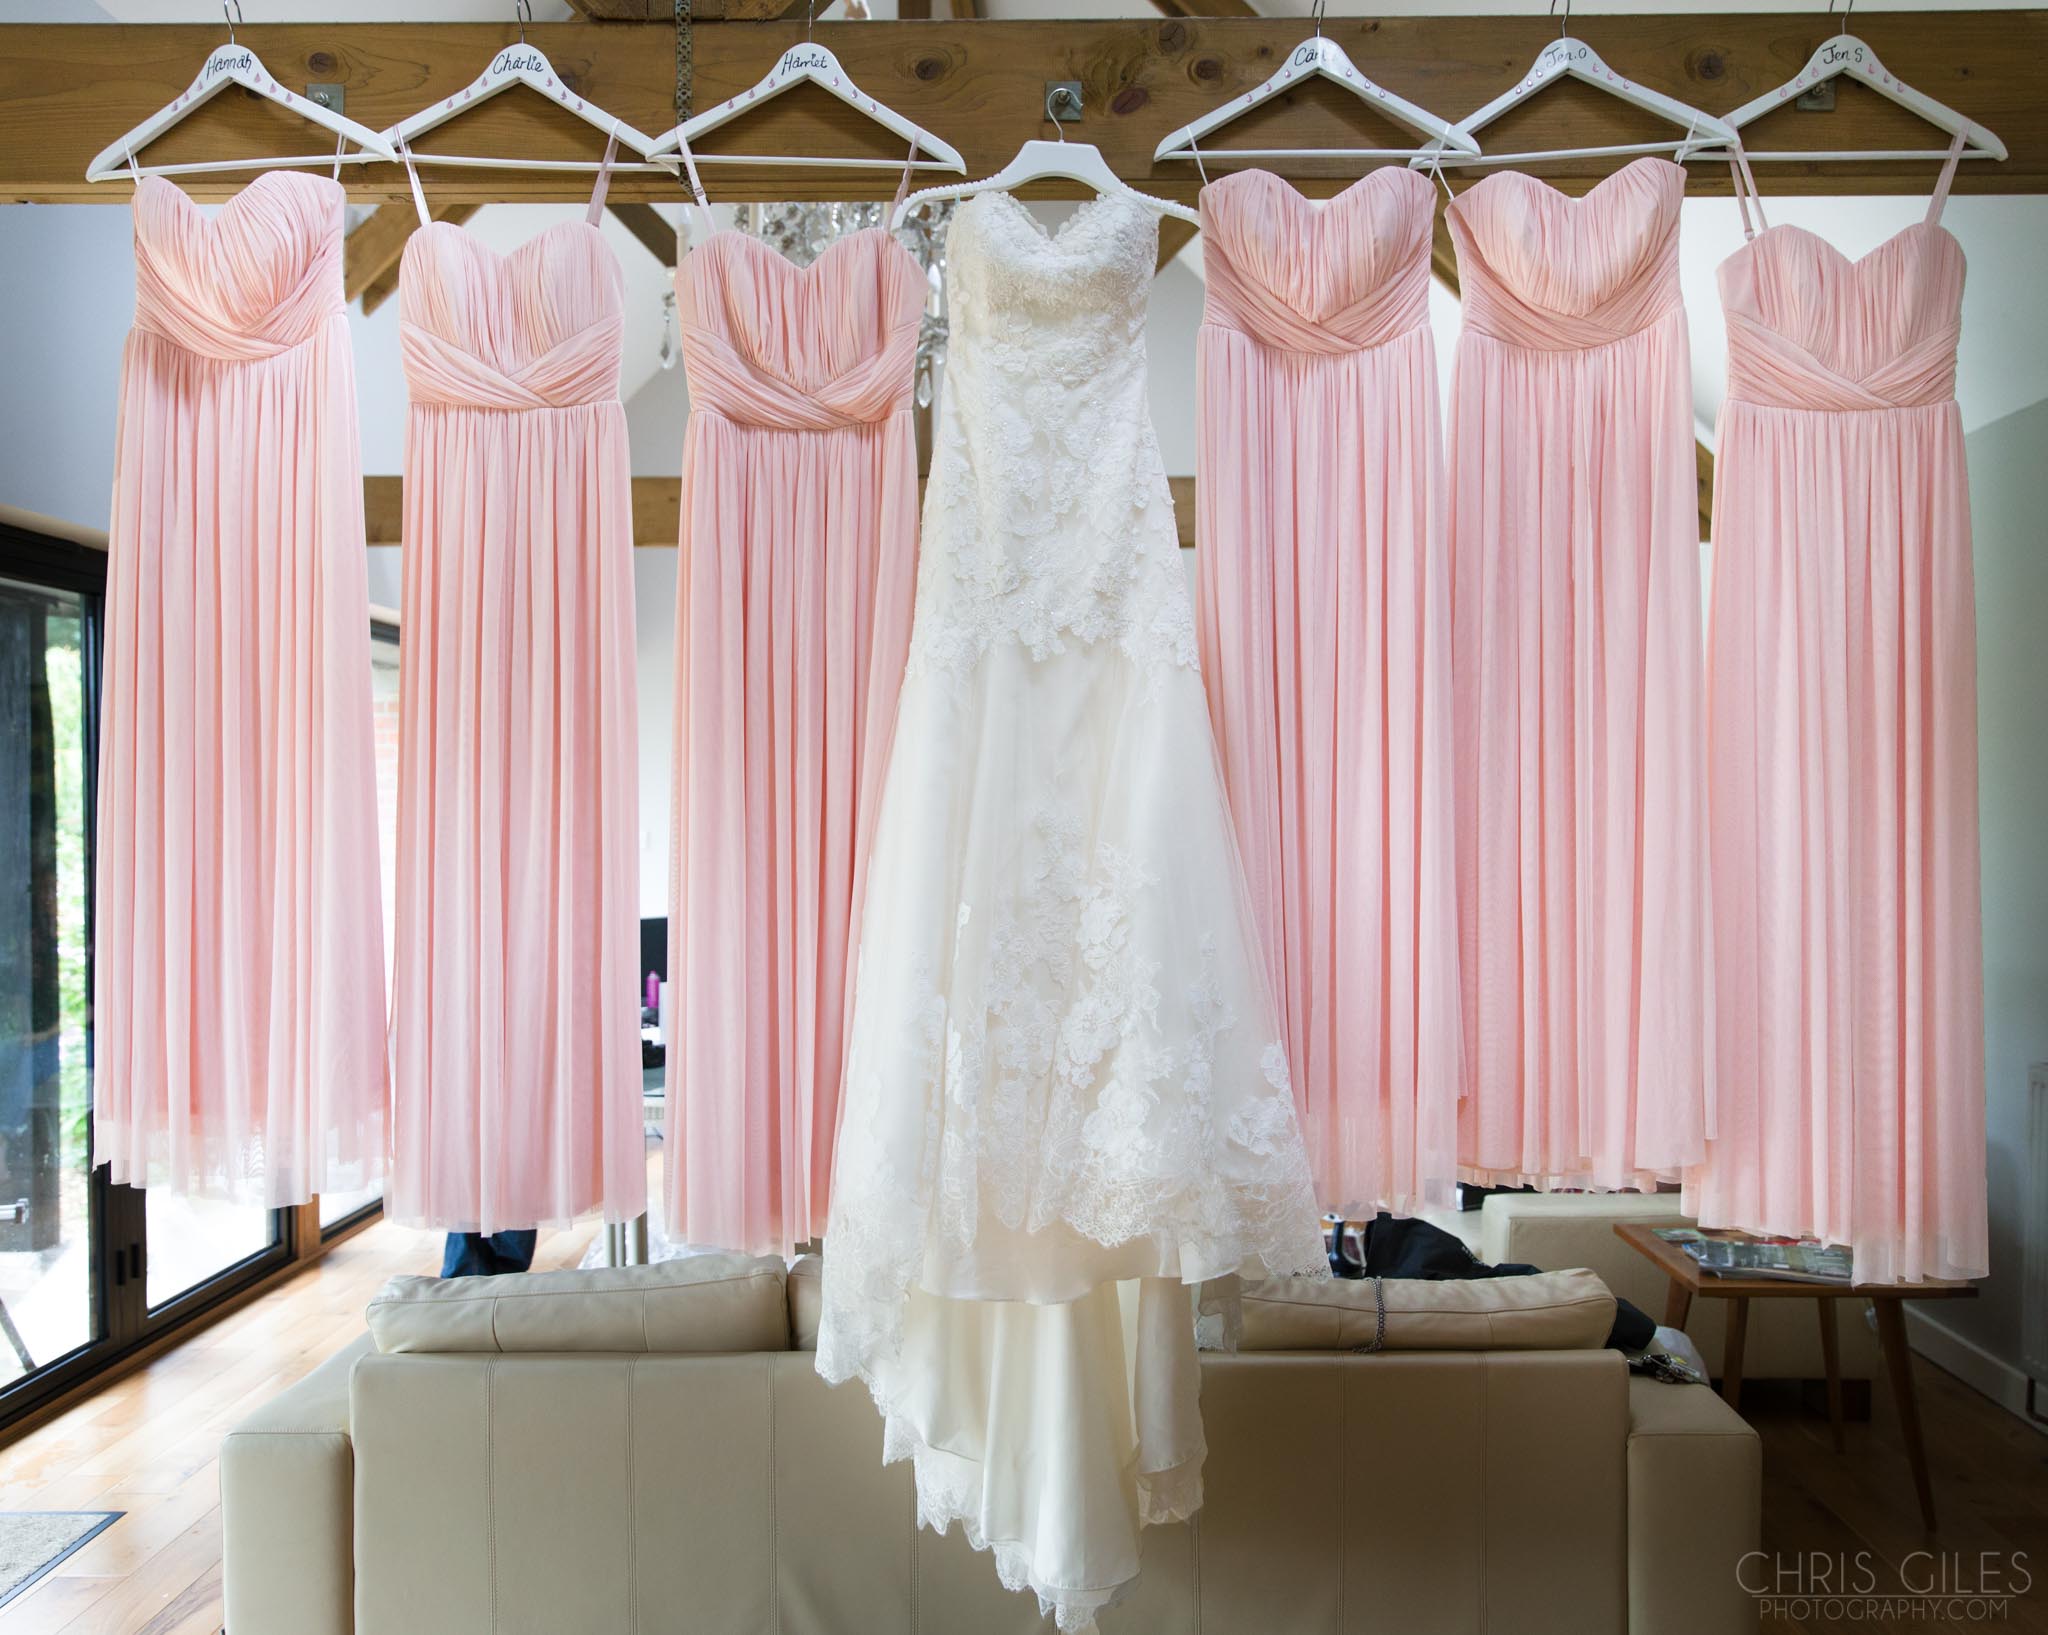 Pastel pink bridesmaids dresses with a white wedding dress in the middle